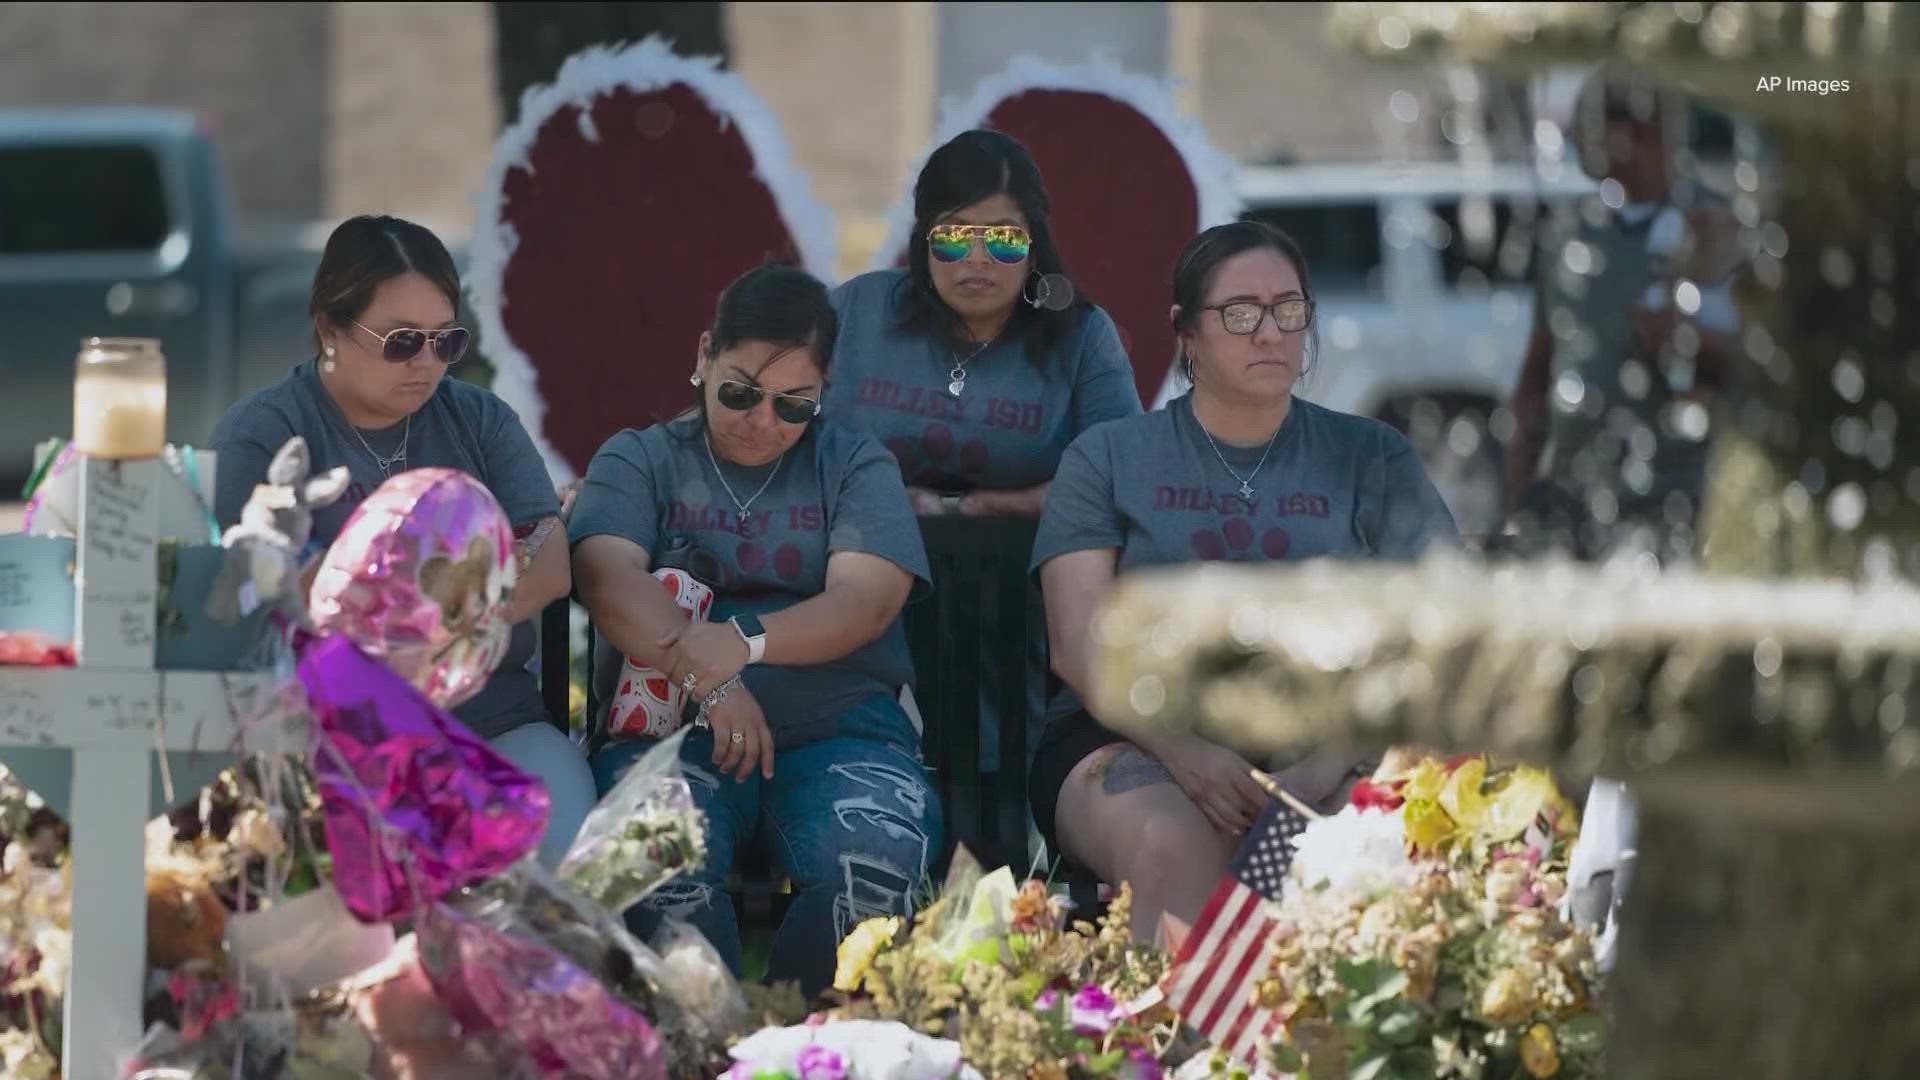 As the Uvalde community mourns, it's also seeking justice.